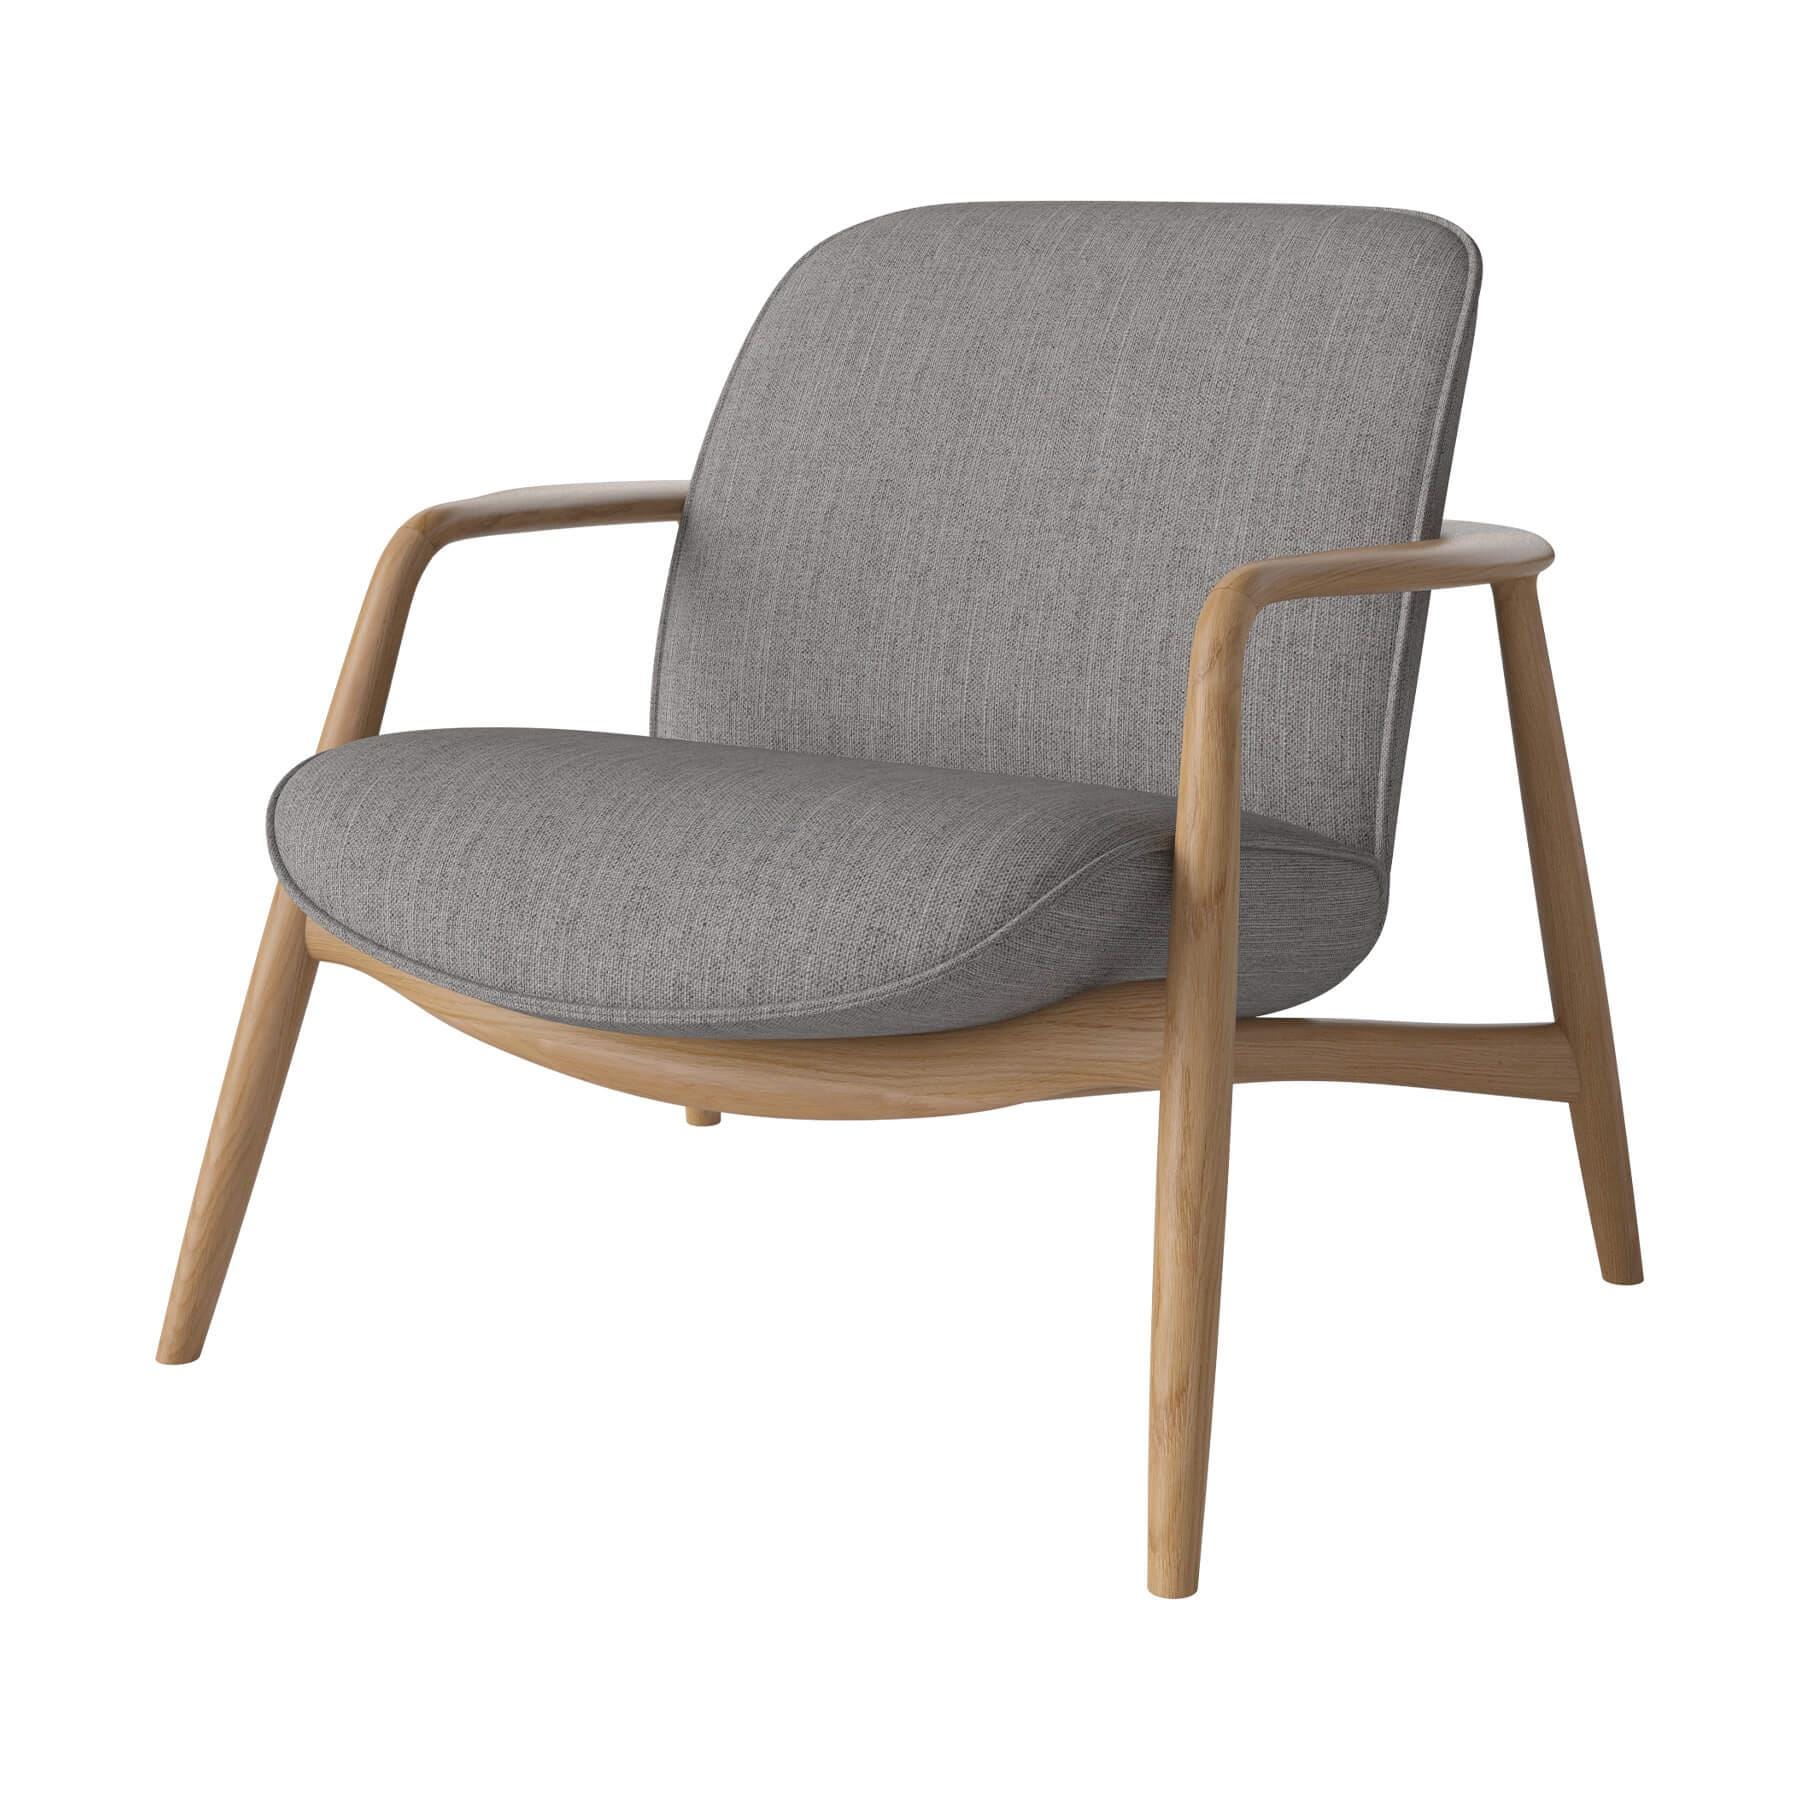 Bolia Bowie Armchair Oiled Oak Baize Grey Designer Furniture From Holloways Of Ludlow